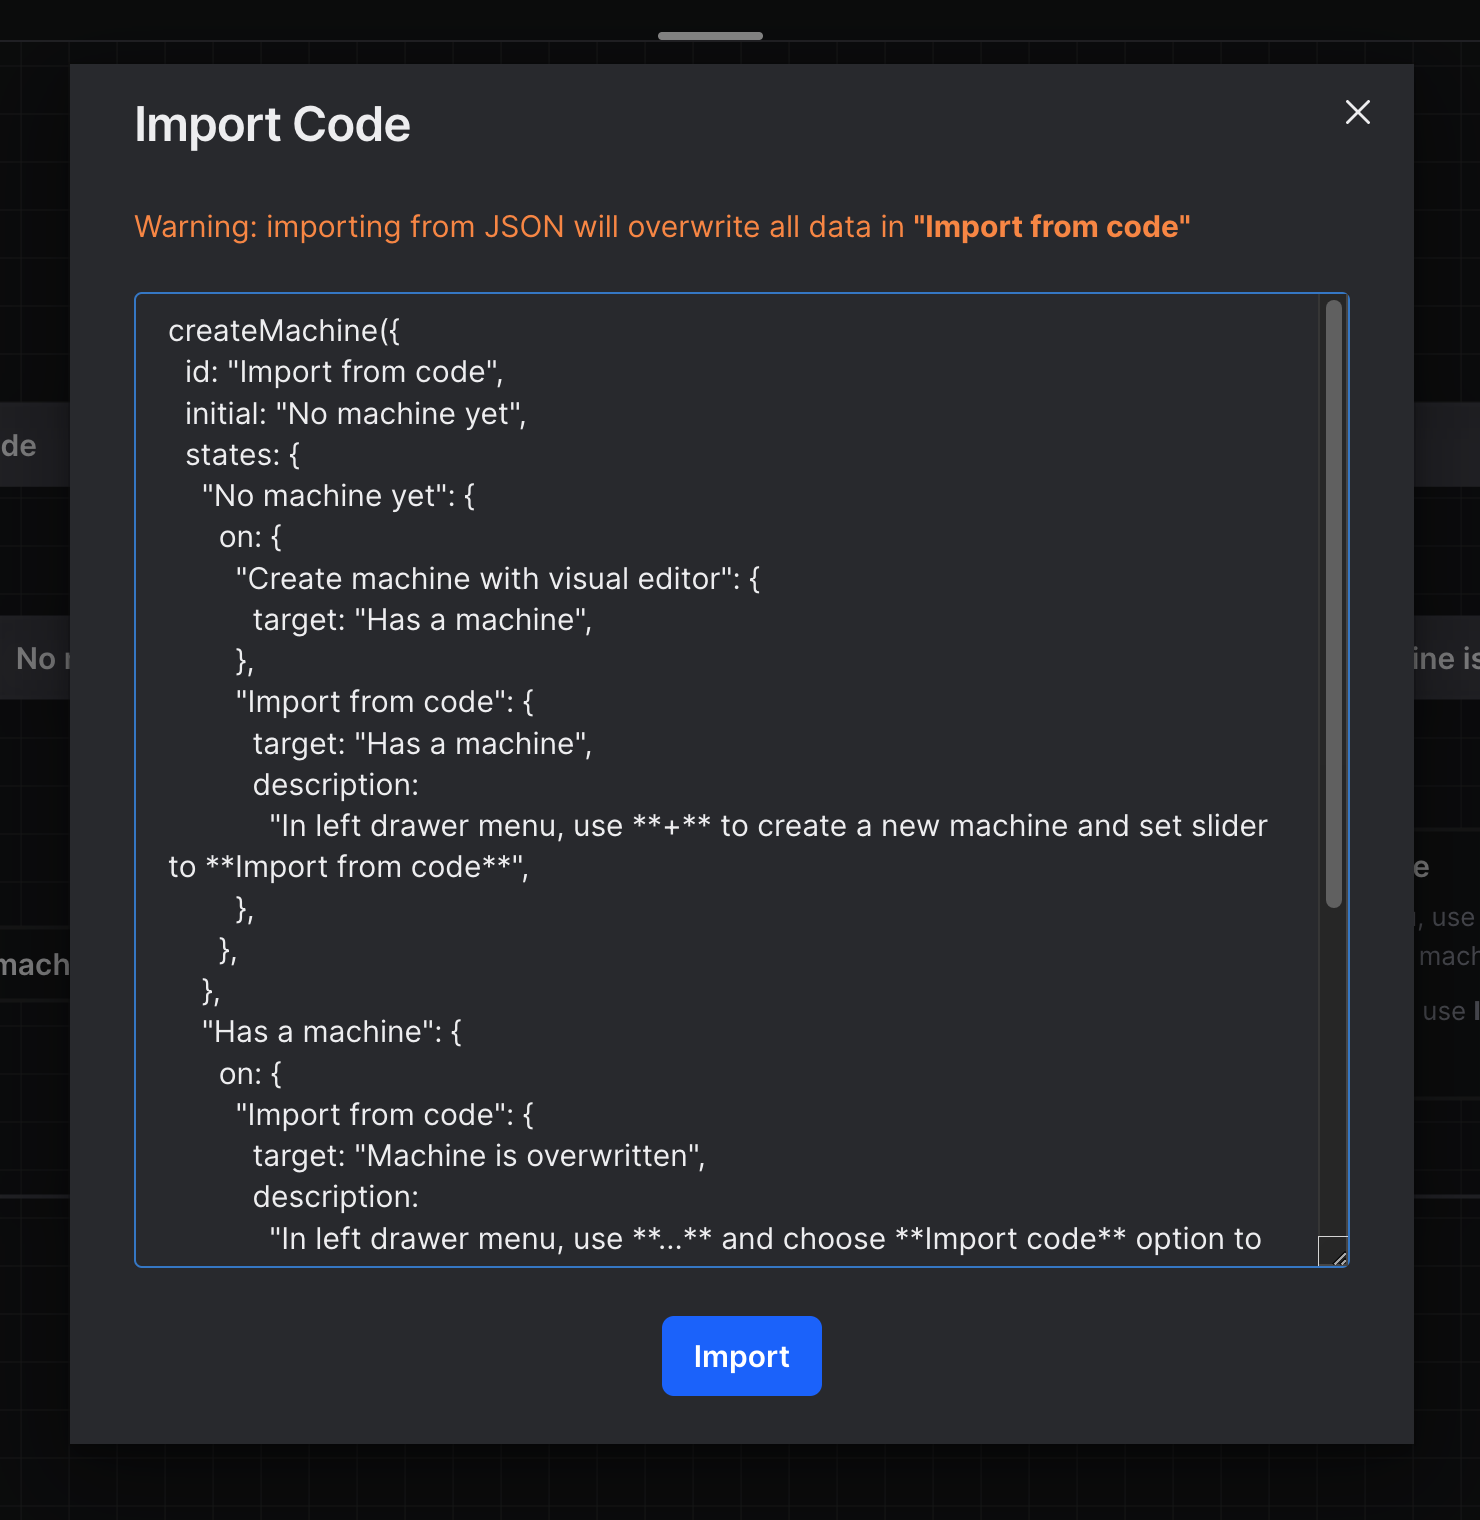 Import Code modal. There’s JavaScript formatted as a createMachine factory function inside the text area. A warning at the top of the dialog warns you that importing from JSON will overwrite all data in “My new machine”.